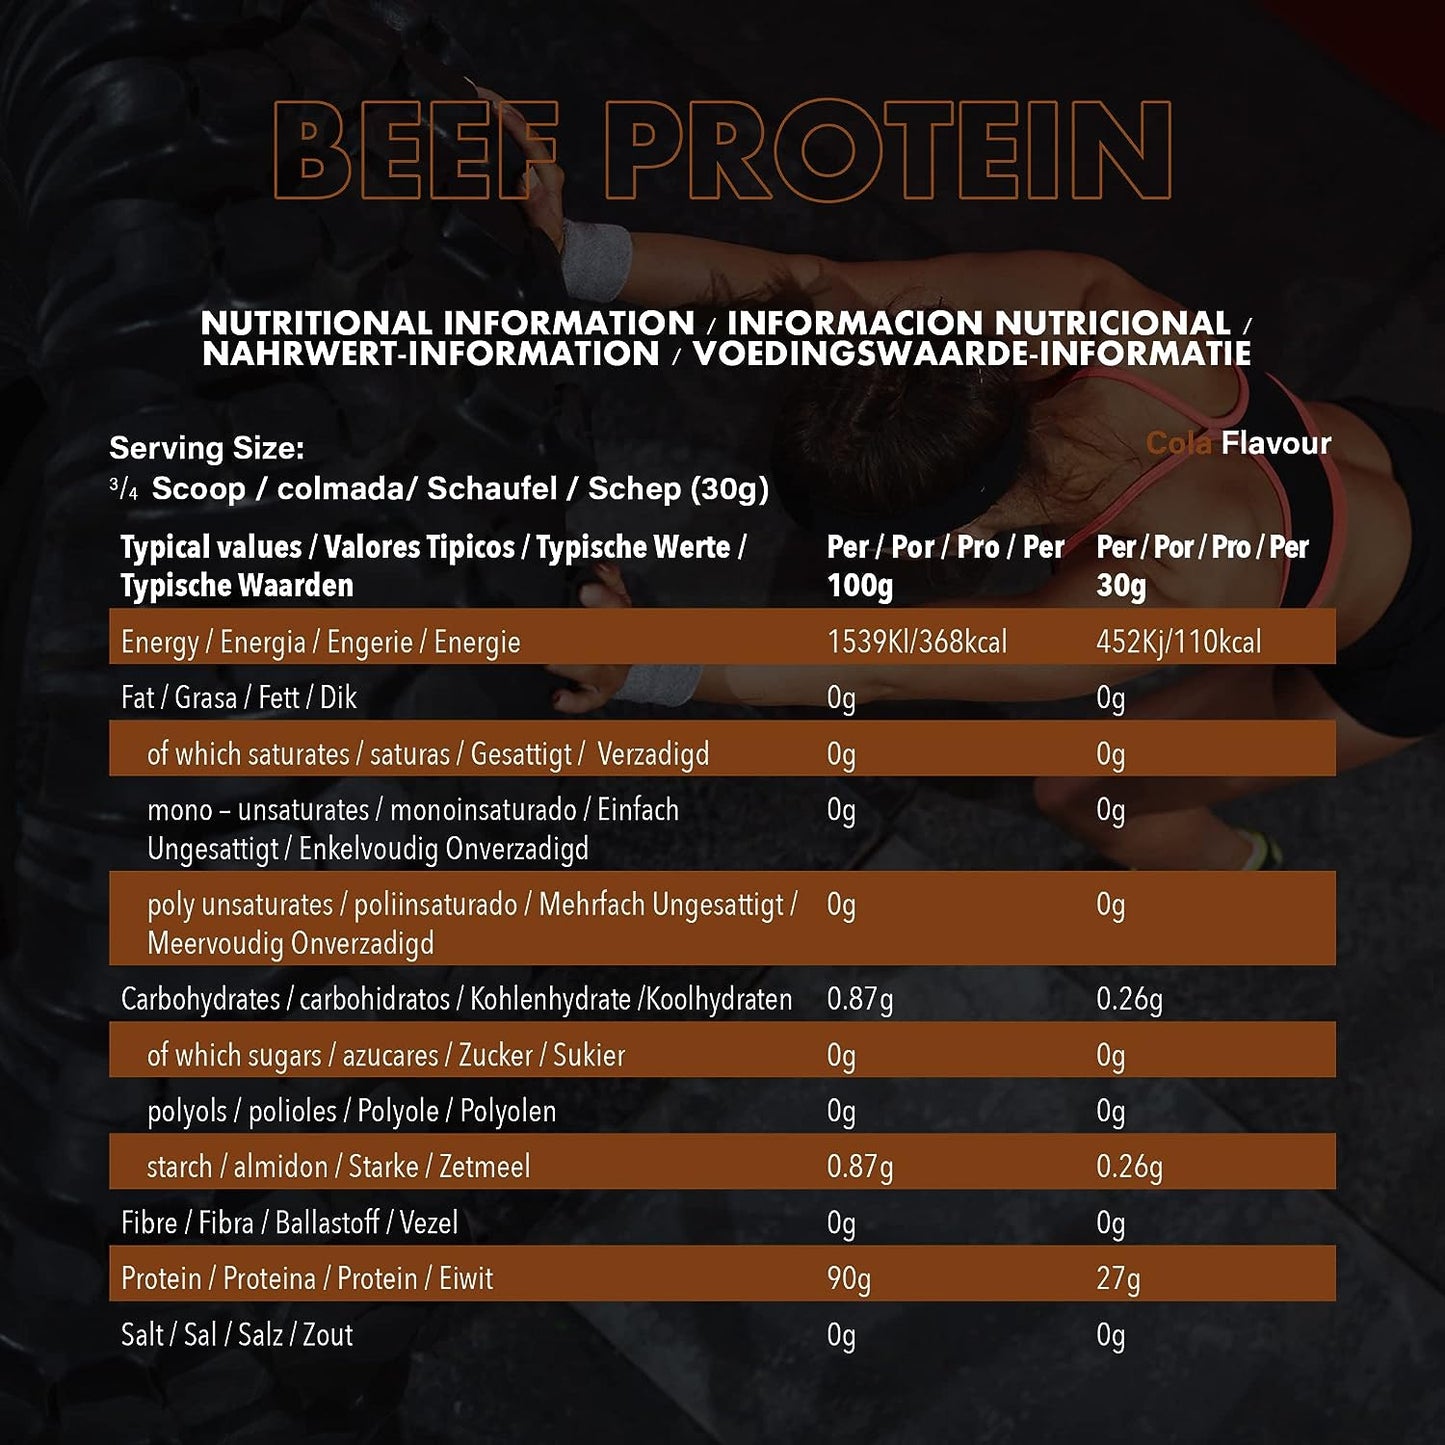 NXT - Beef Protein Isolate Cherry Cola 1.8 kg